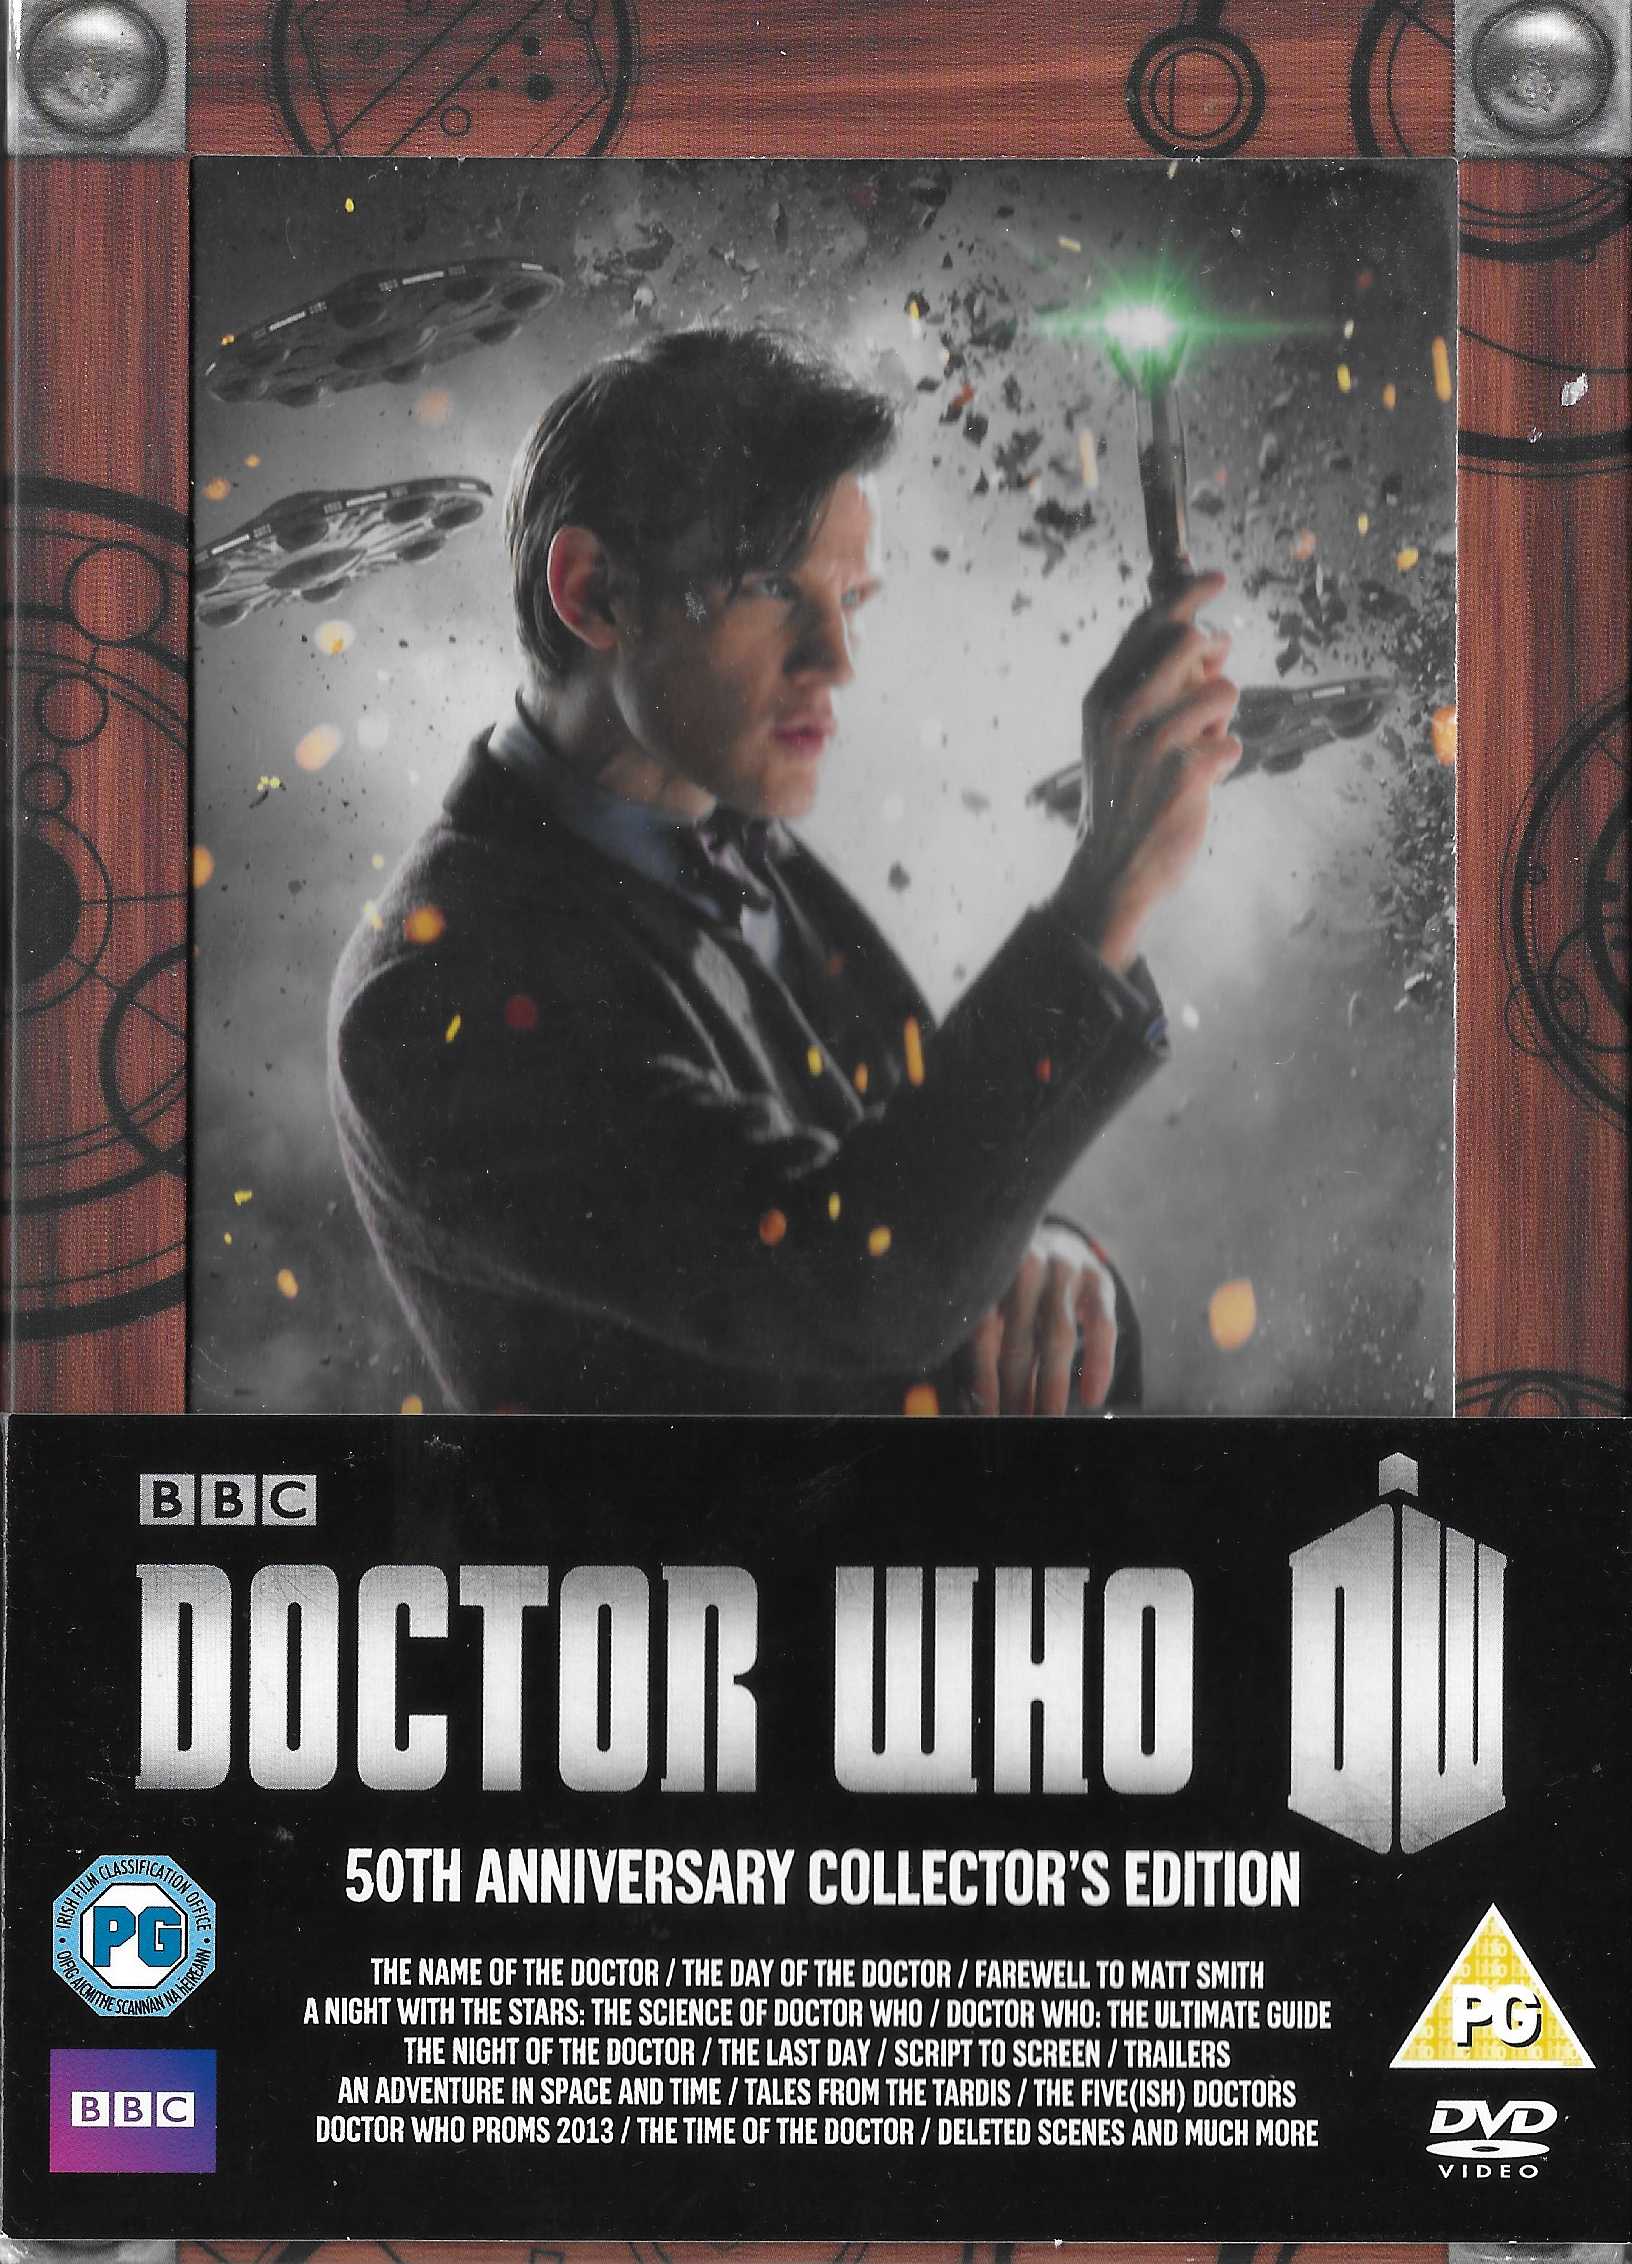 Picture of BBCDVD 3933 Doctor Who - 50th anniversary collector's edition by artist Steven Moffat / Mark Gatiss from the BBC dvds - Records and Tapes library